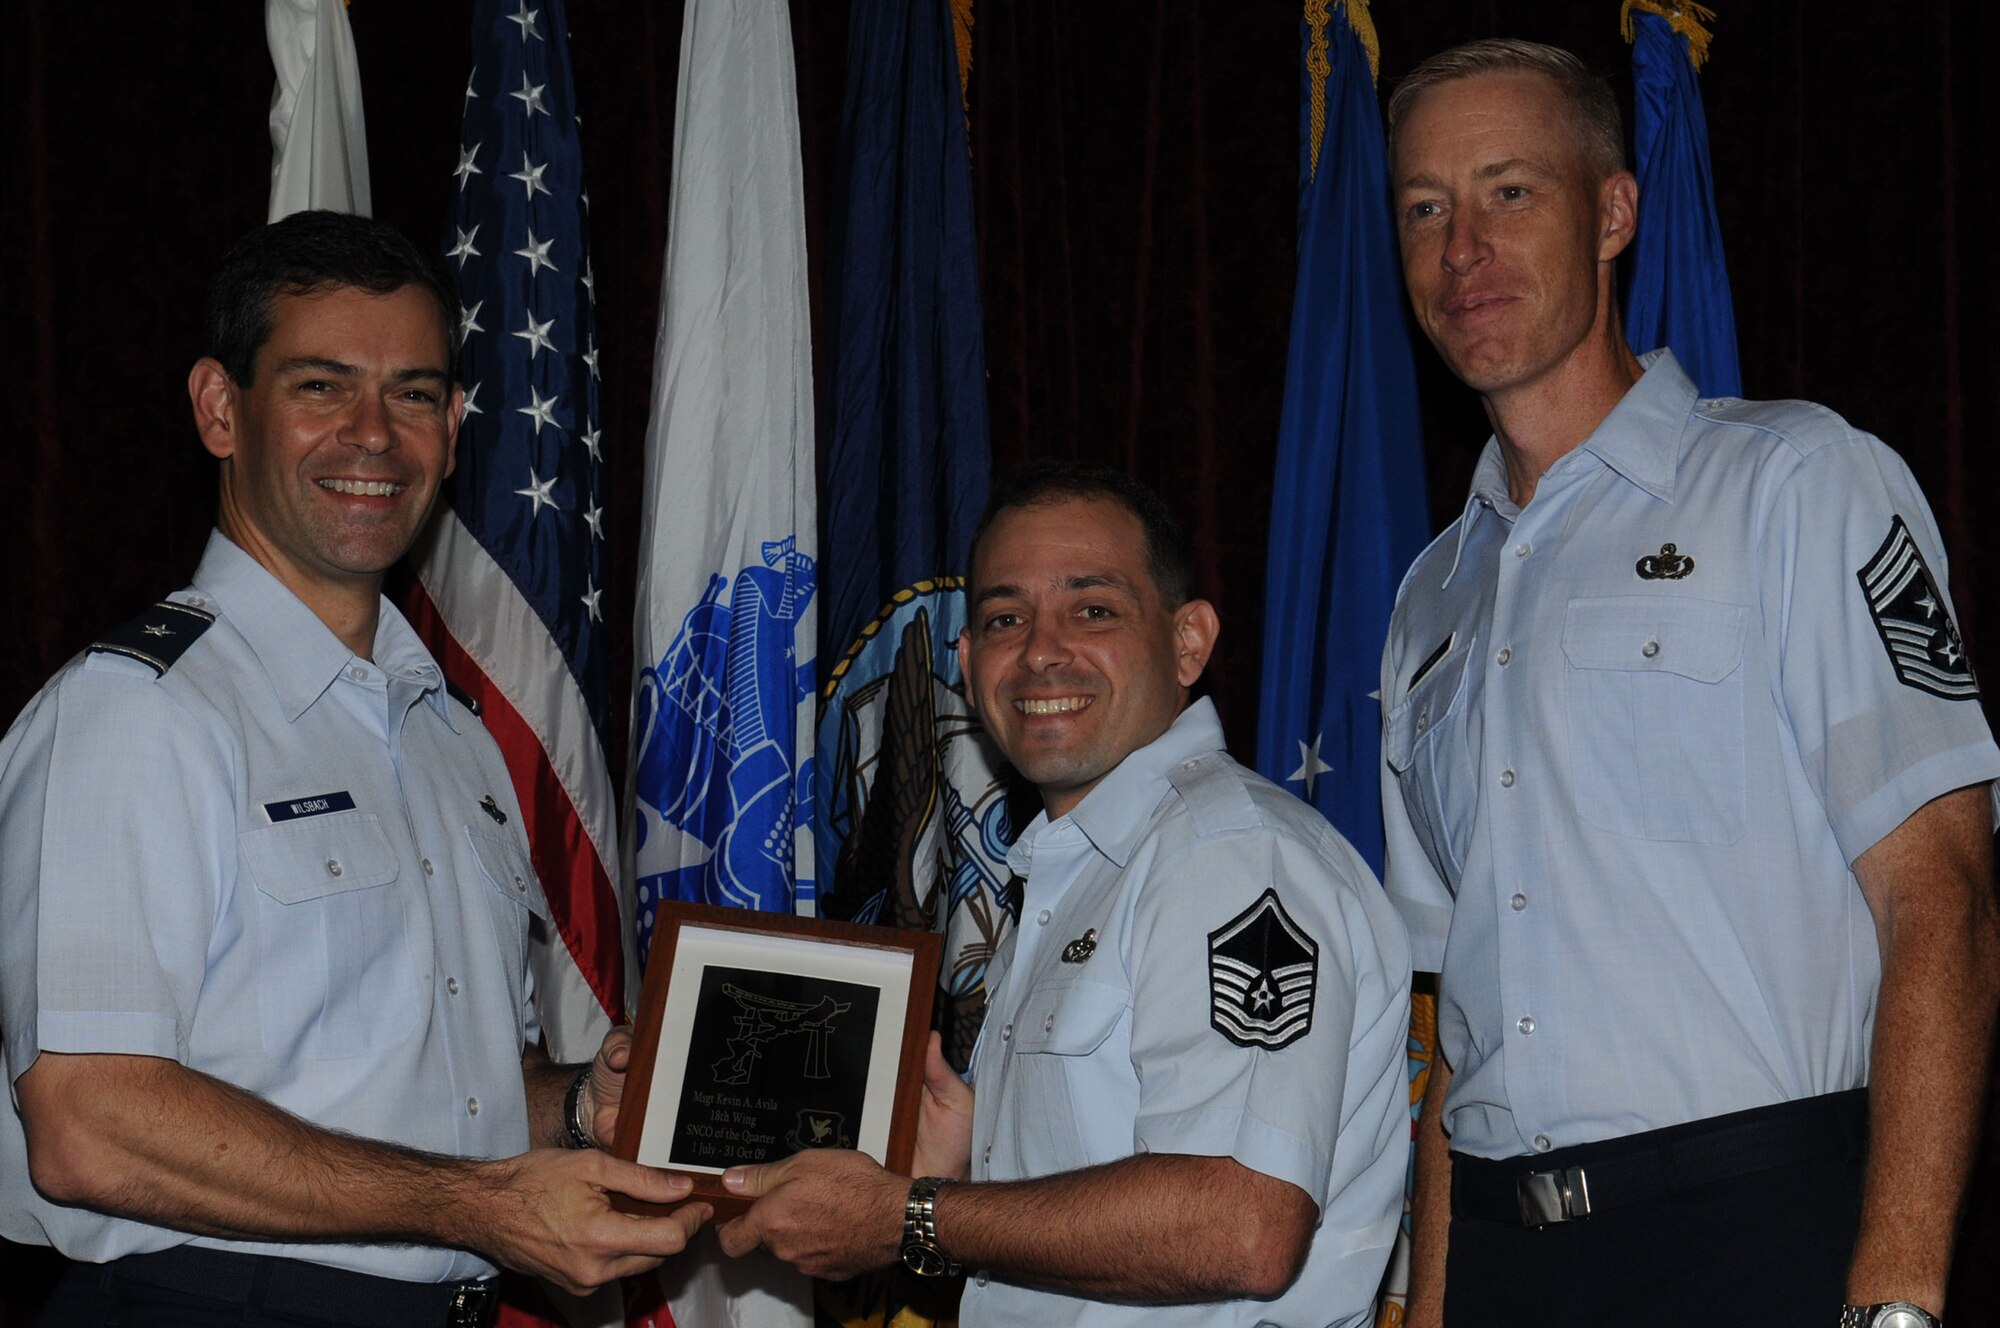 Master Sgt. Kevin Avila, 18th Civil Engineer Squadron, was named the 18th Wing Senior NCO of the Quarter.